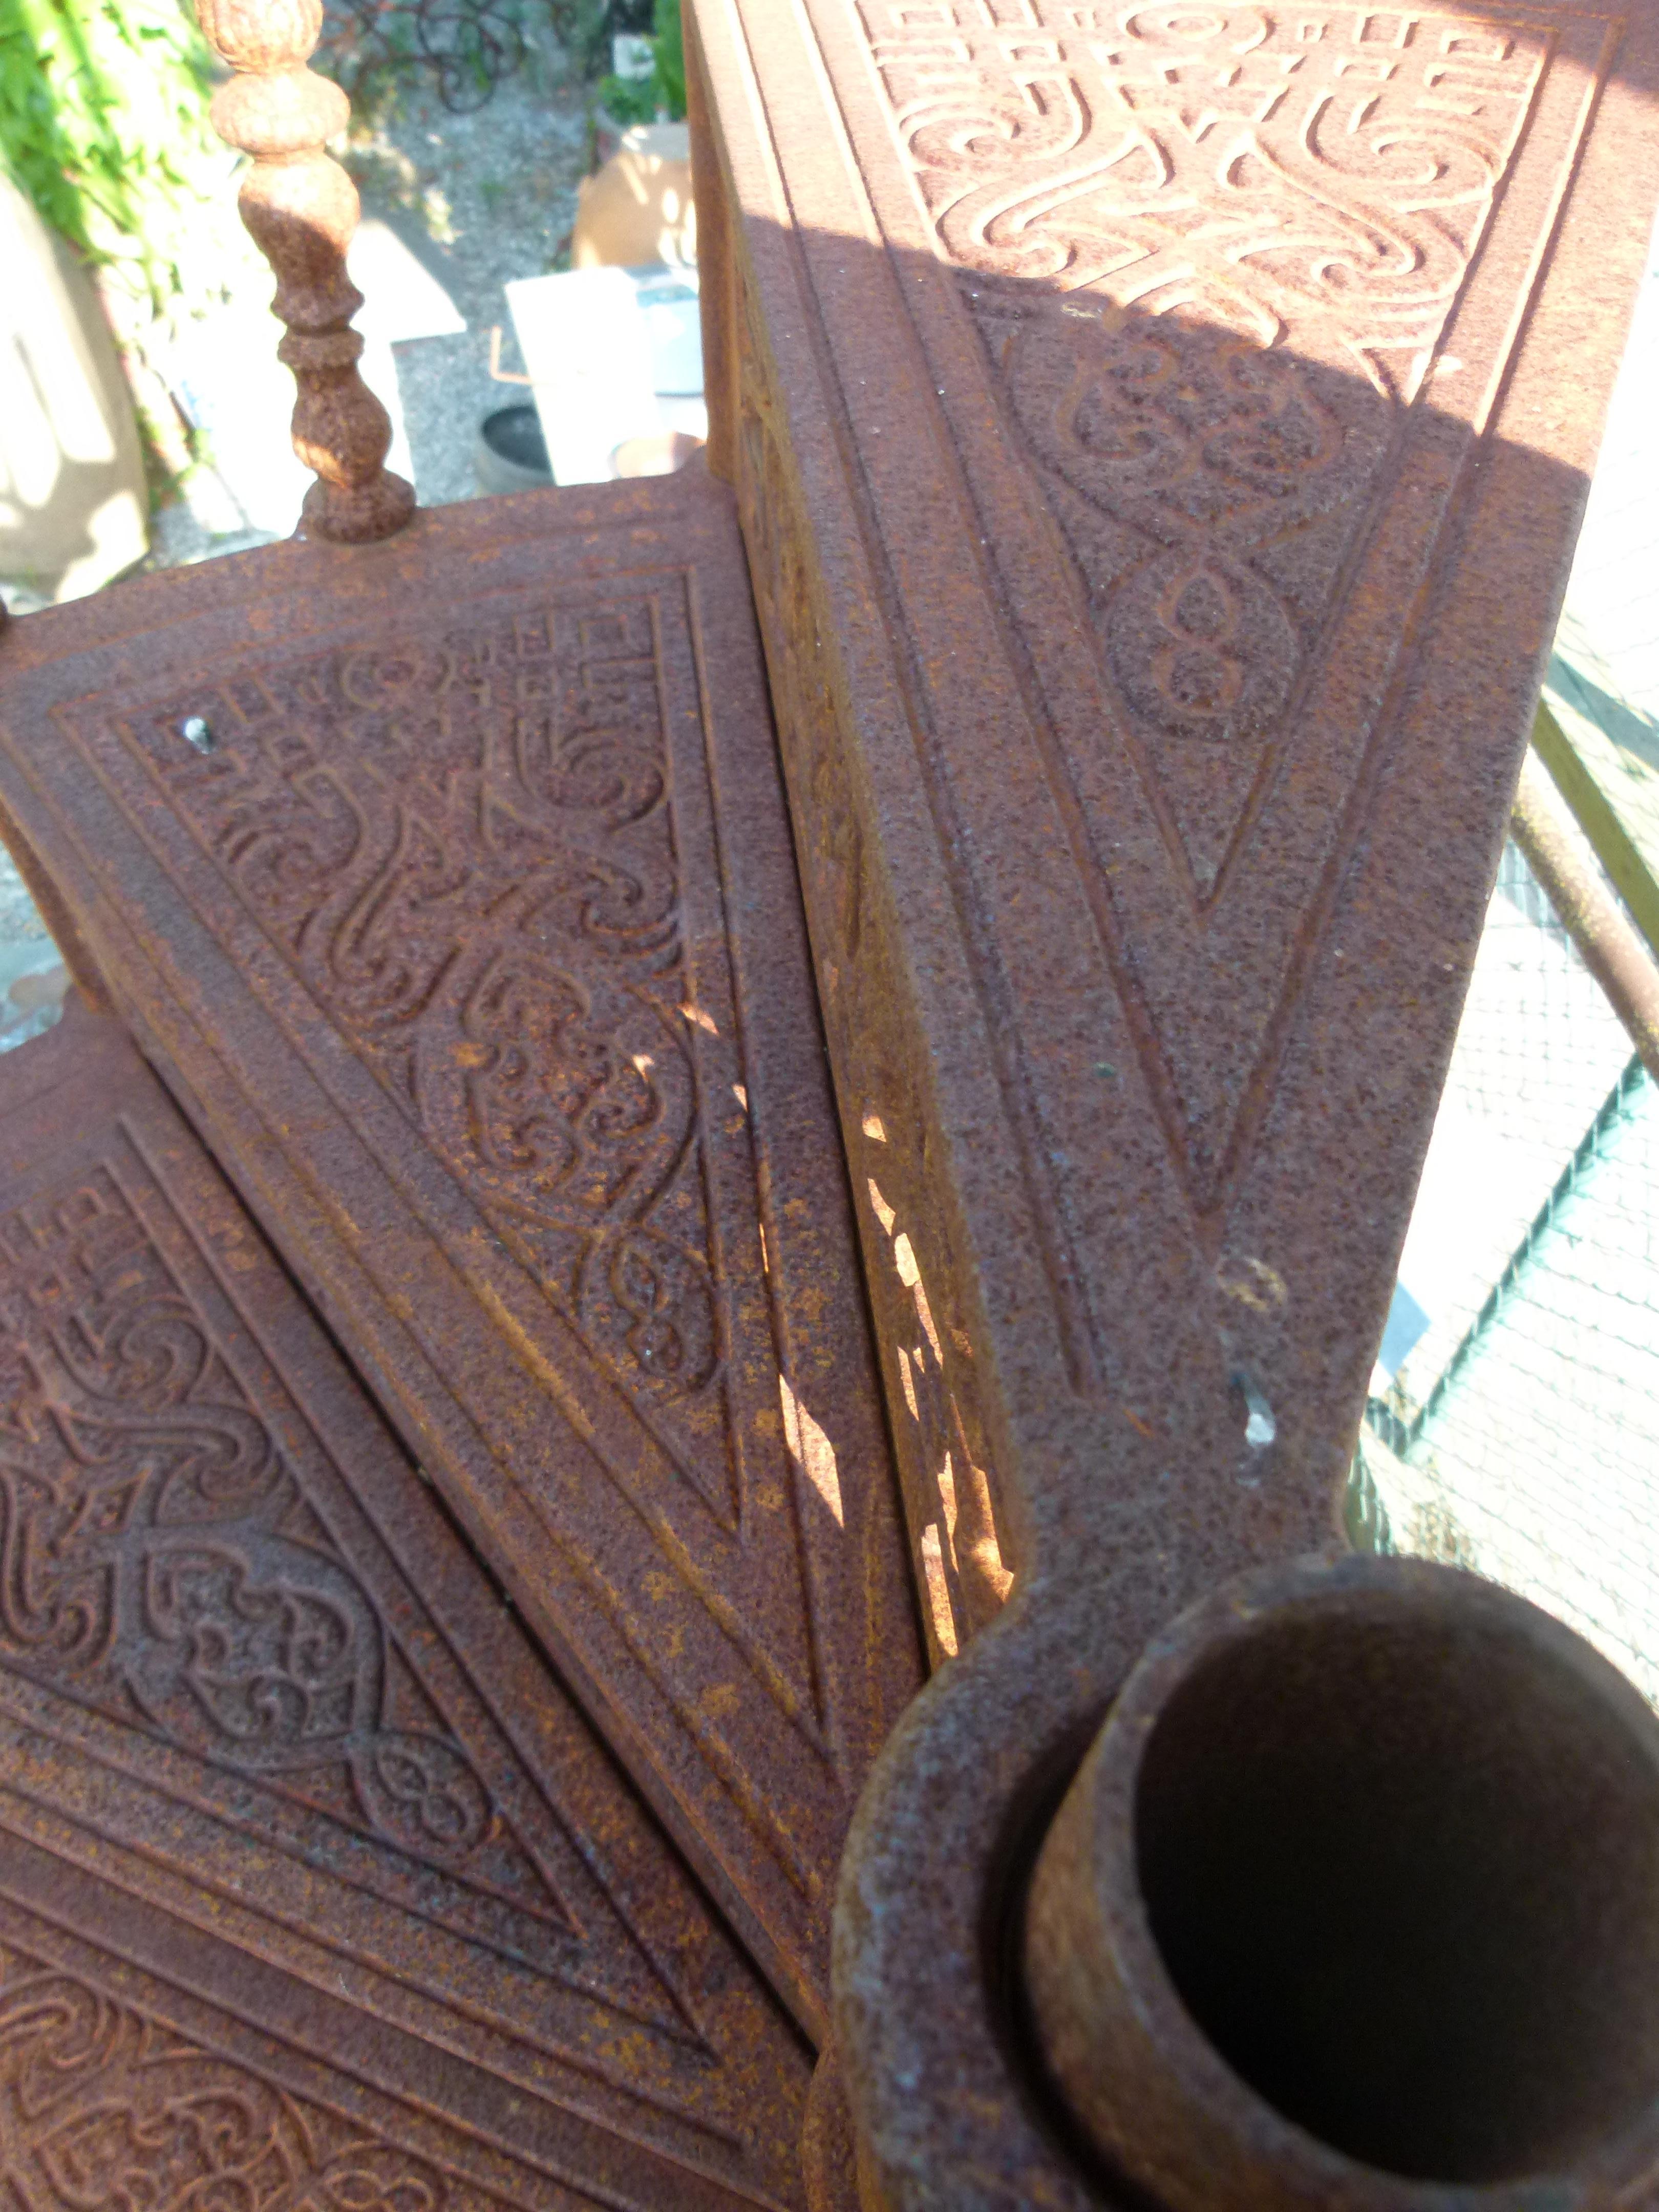 20th Century Art Nouveau Style Iron Spiral Staircase In Good Condition For Sale In Vulpellac, Girona